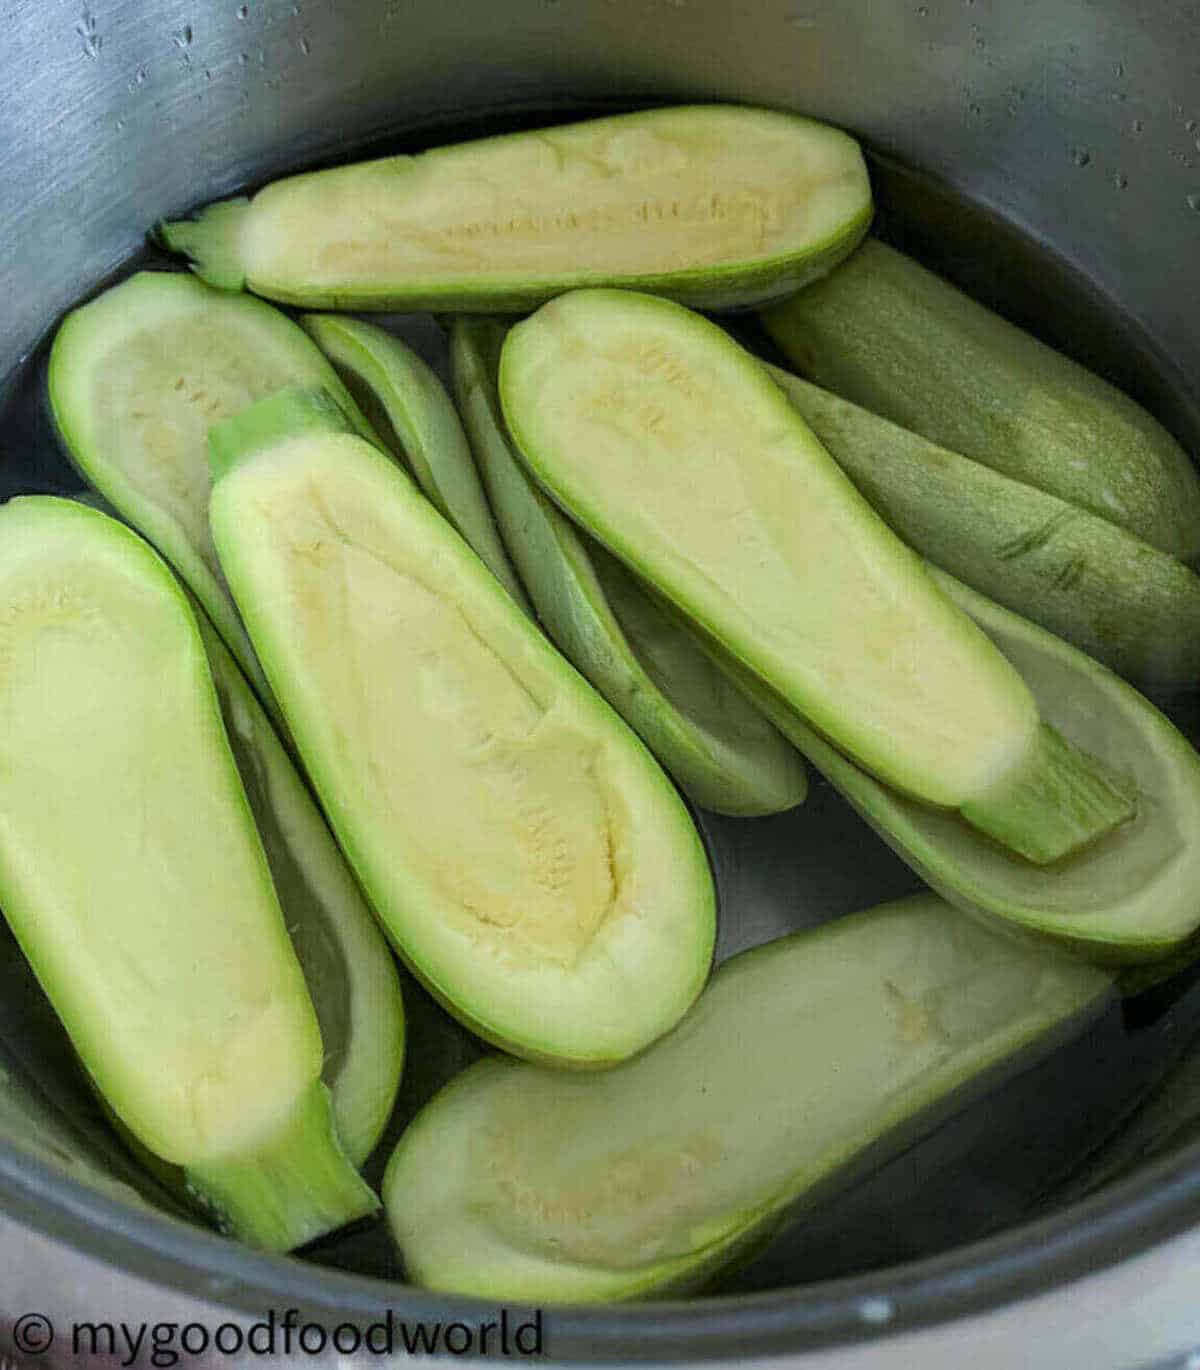 Many courgette halves, scooped and cleaned, placed in water.